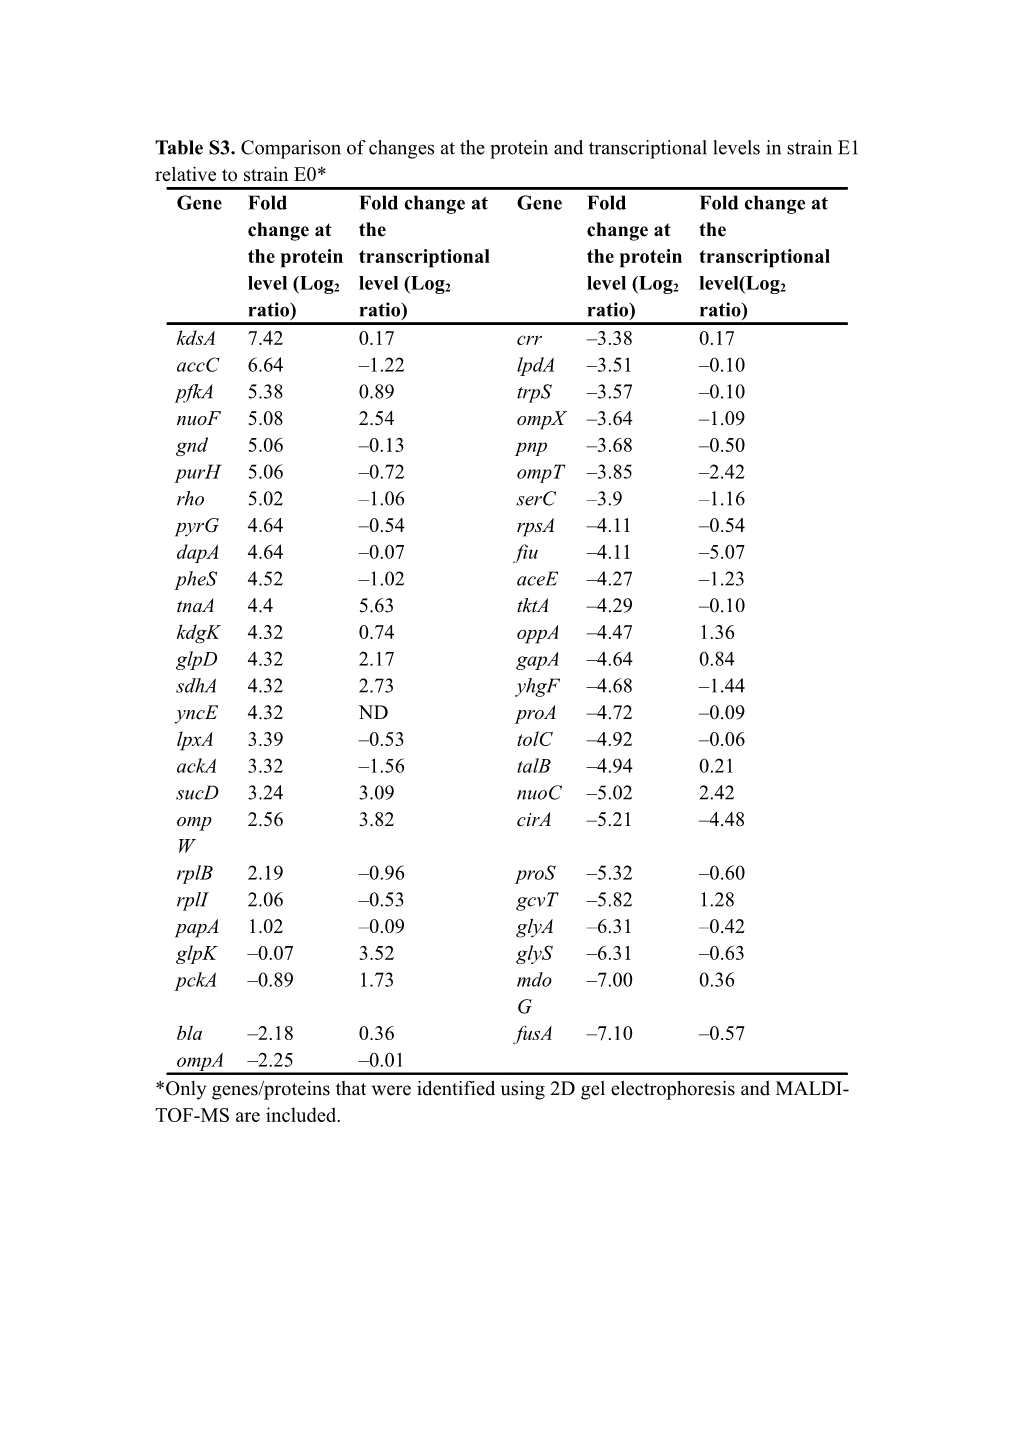 Table S3. Comparison of Changes at the Protein and Transcriptional Levels in Strain E1